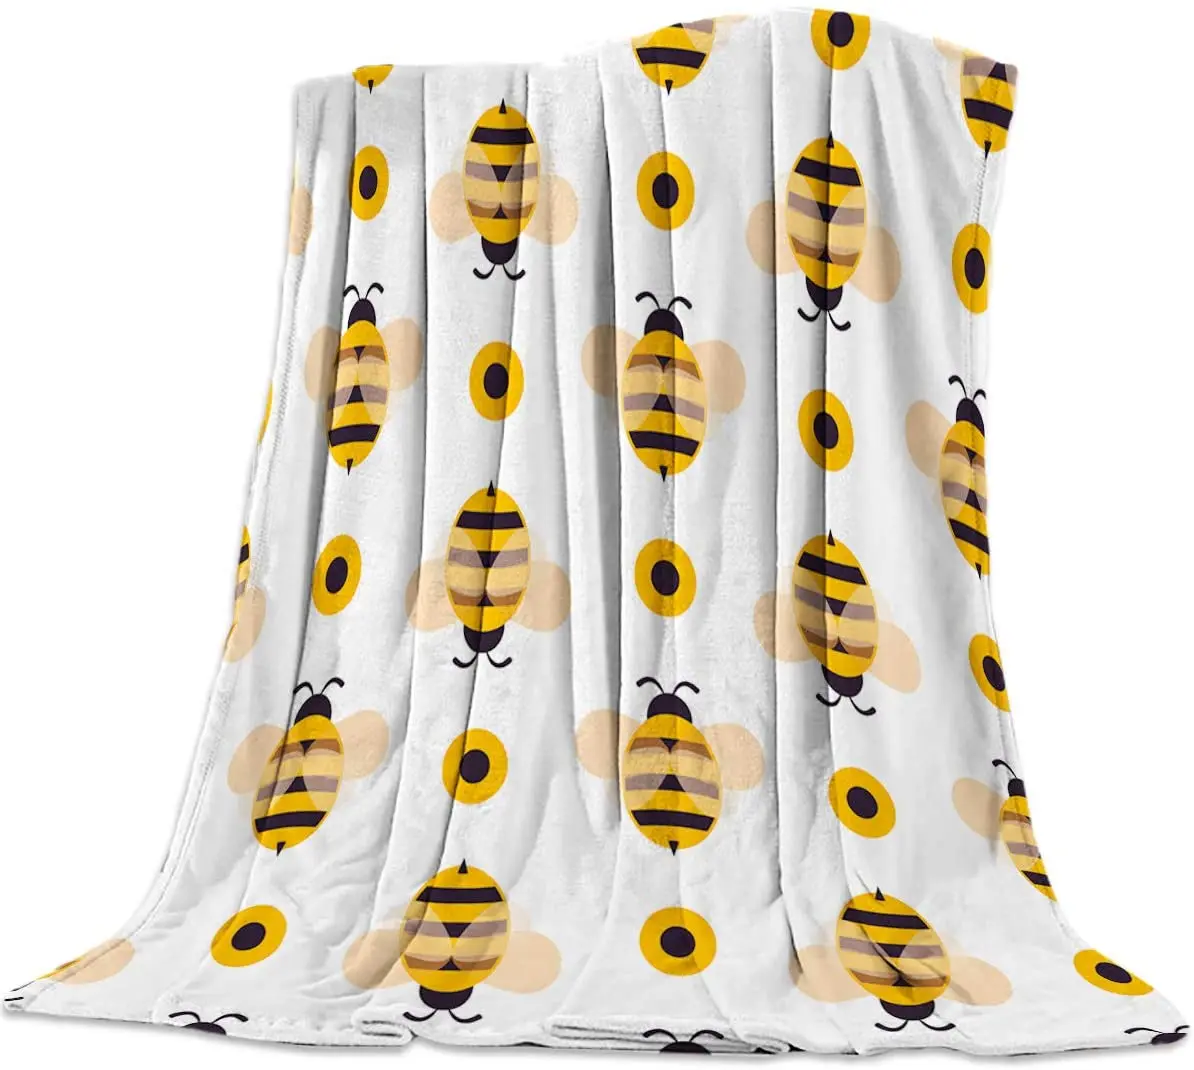 

Lightweight Flannel Traveling Soft Throw Blanket Cartoon Bumble Big Honey Bee Blankets Bedcovers Bedspread Throws for Couch Bed